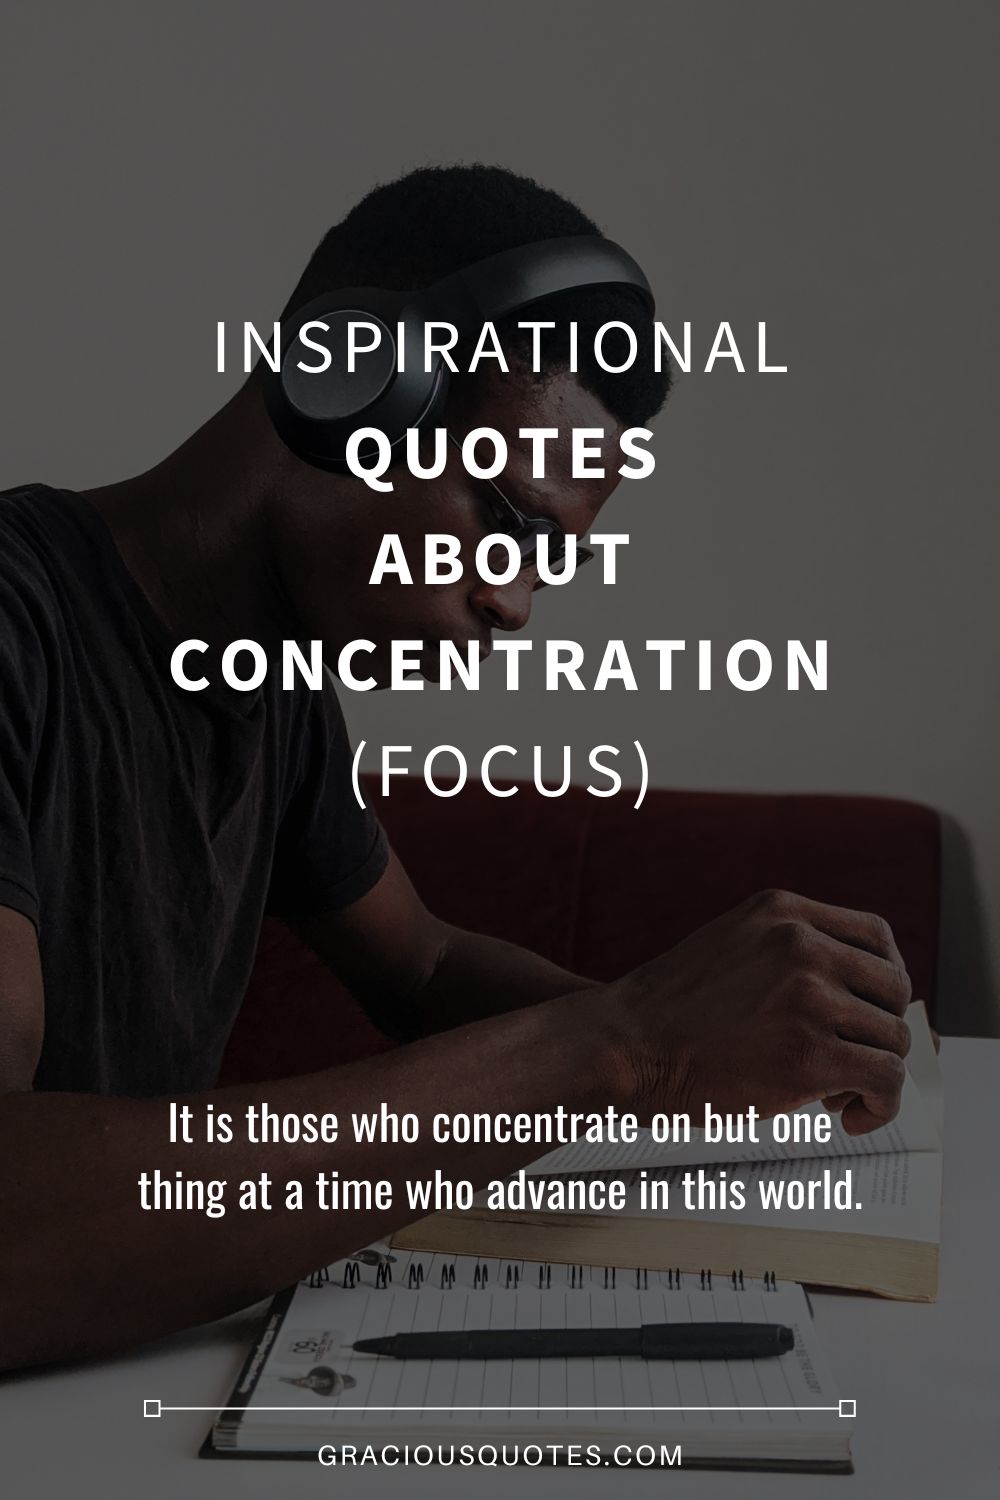 Inspirational Quotes About Concentration (FOCUS) - Gracious Quotes